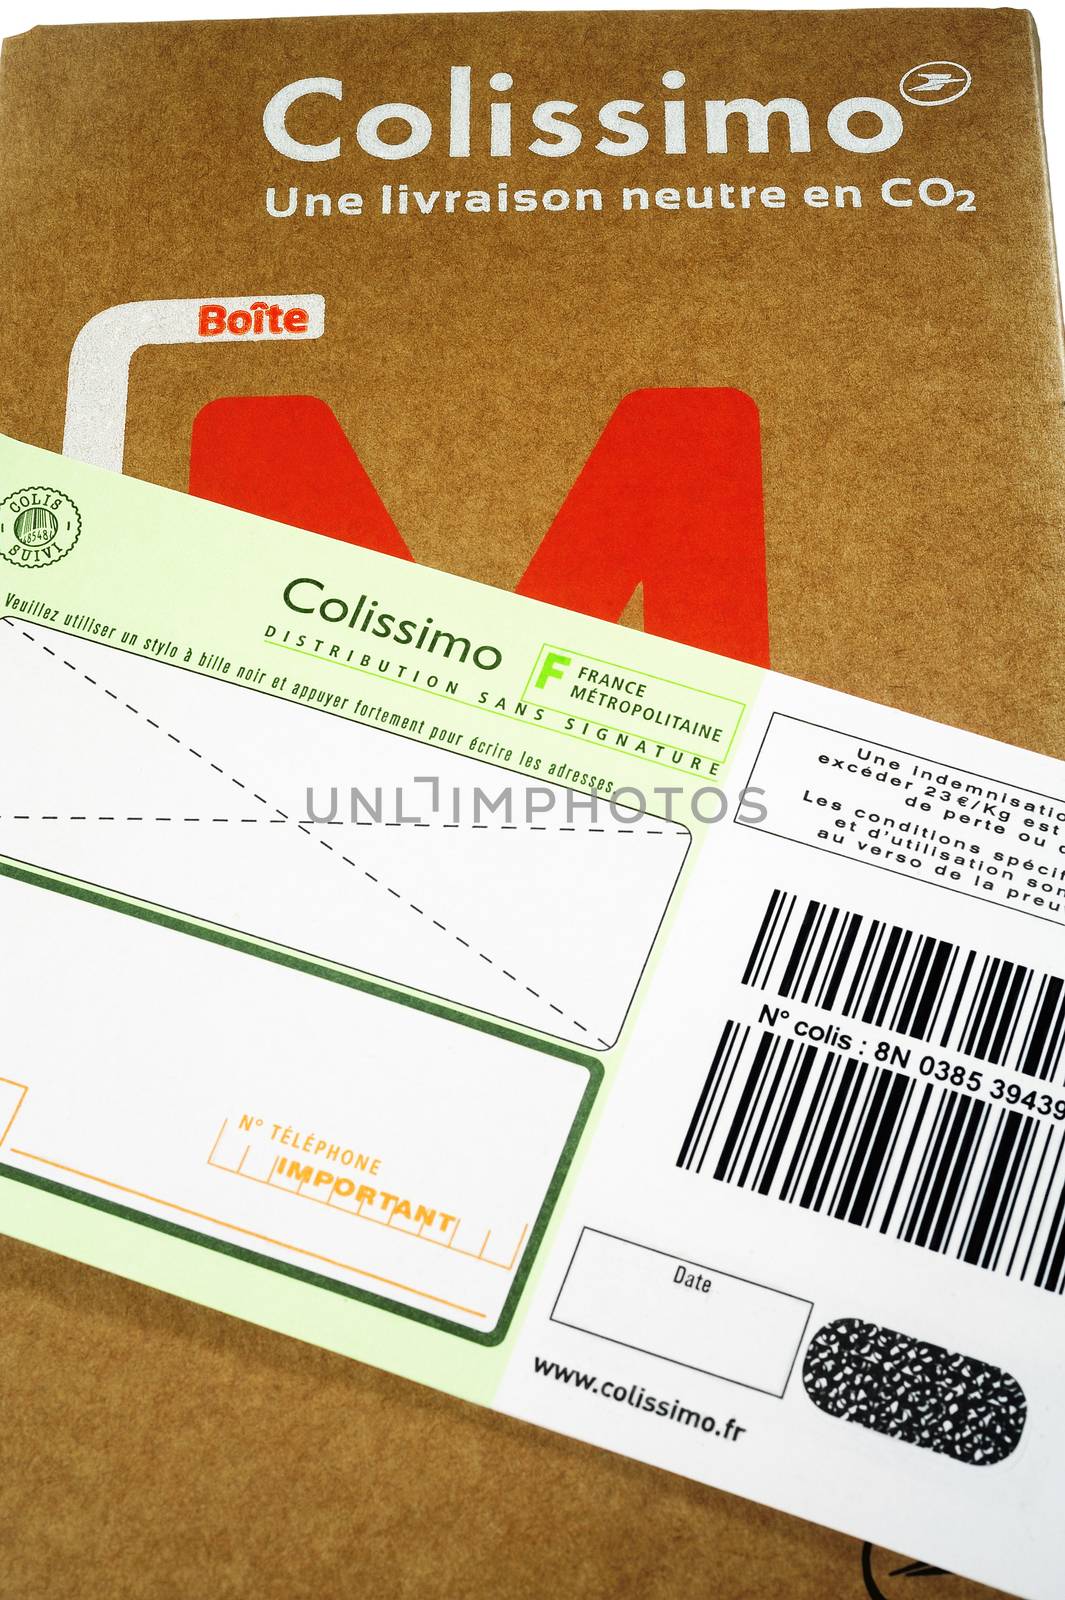 Mailing carton sold by the French Post for sending in France and followed by bar code with an insurance in case of loss.